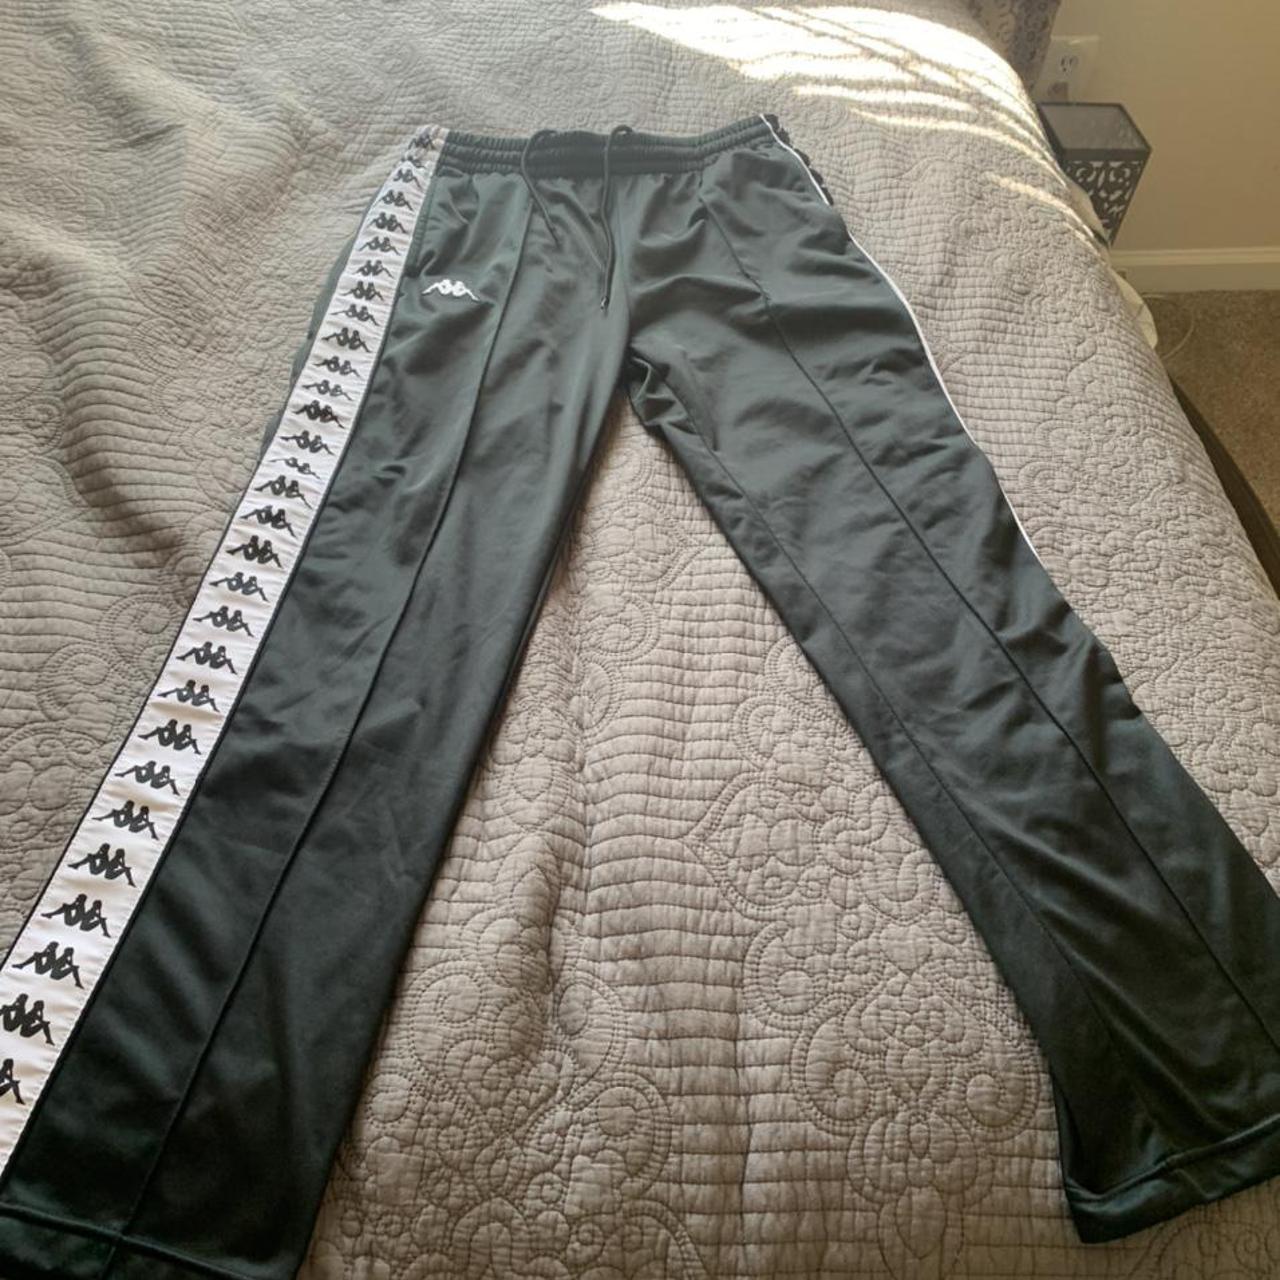 Kappa Men's Black and White Joggers-tracksuits | Depop